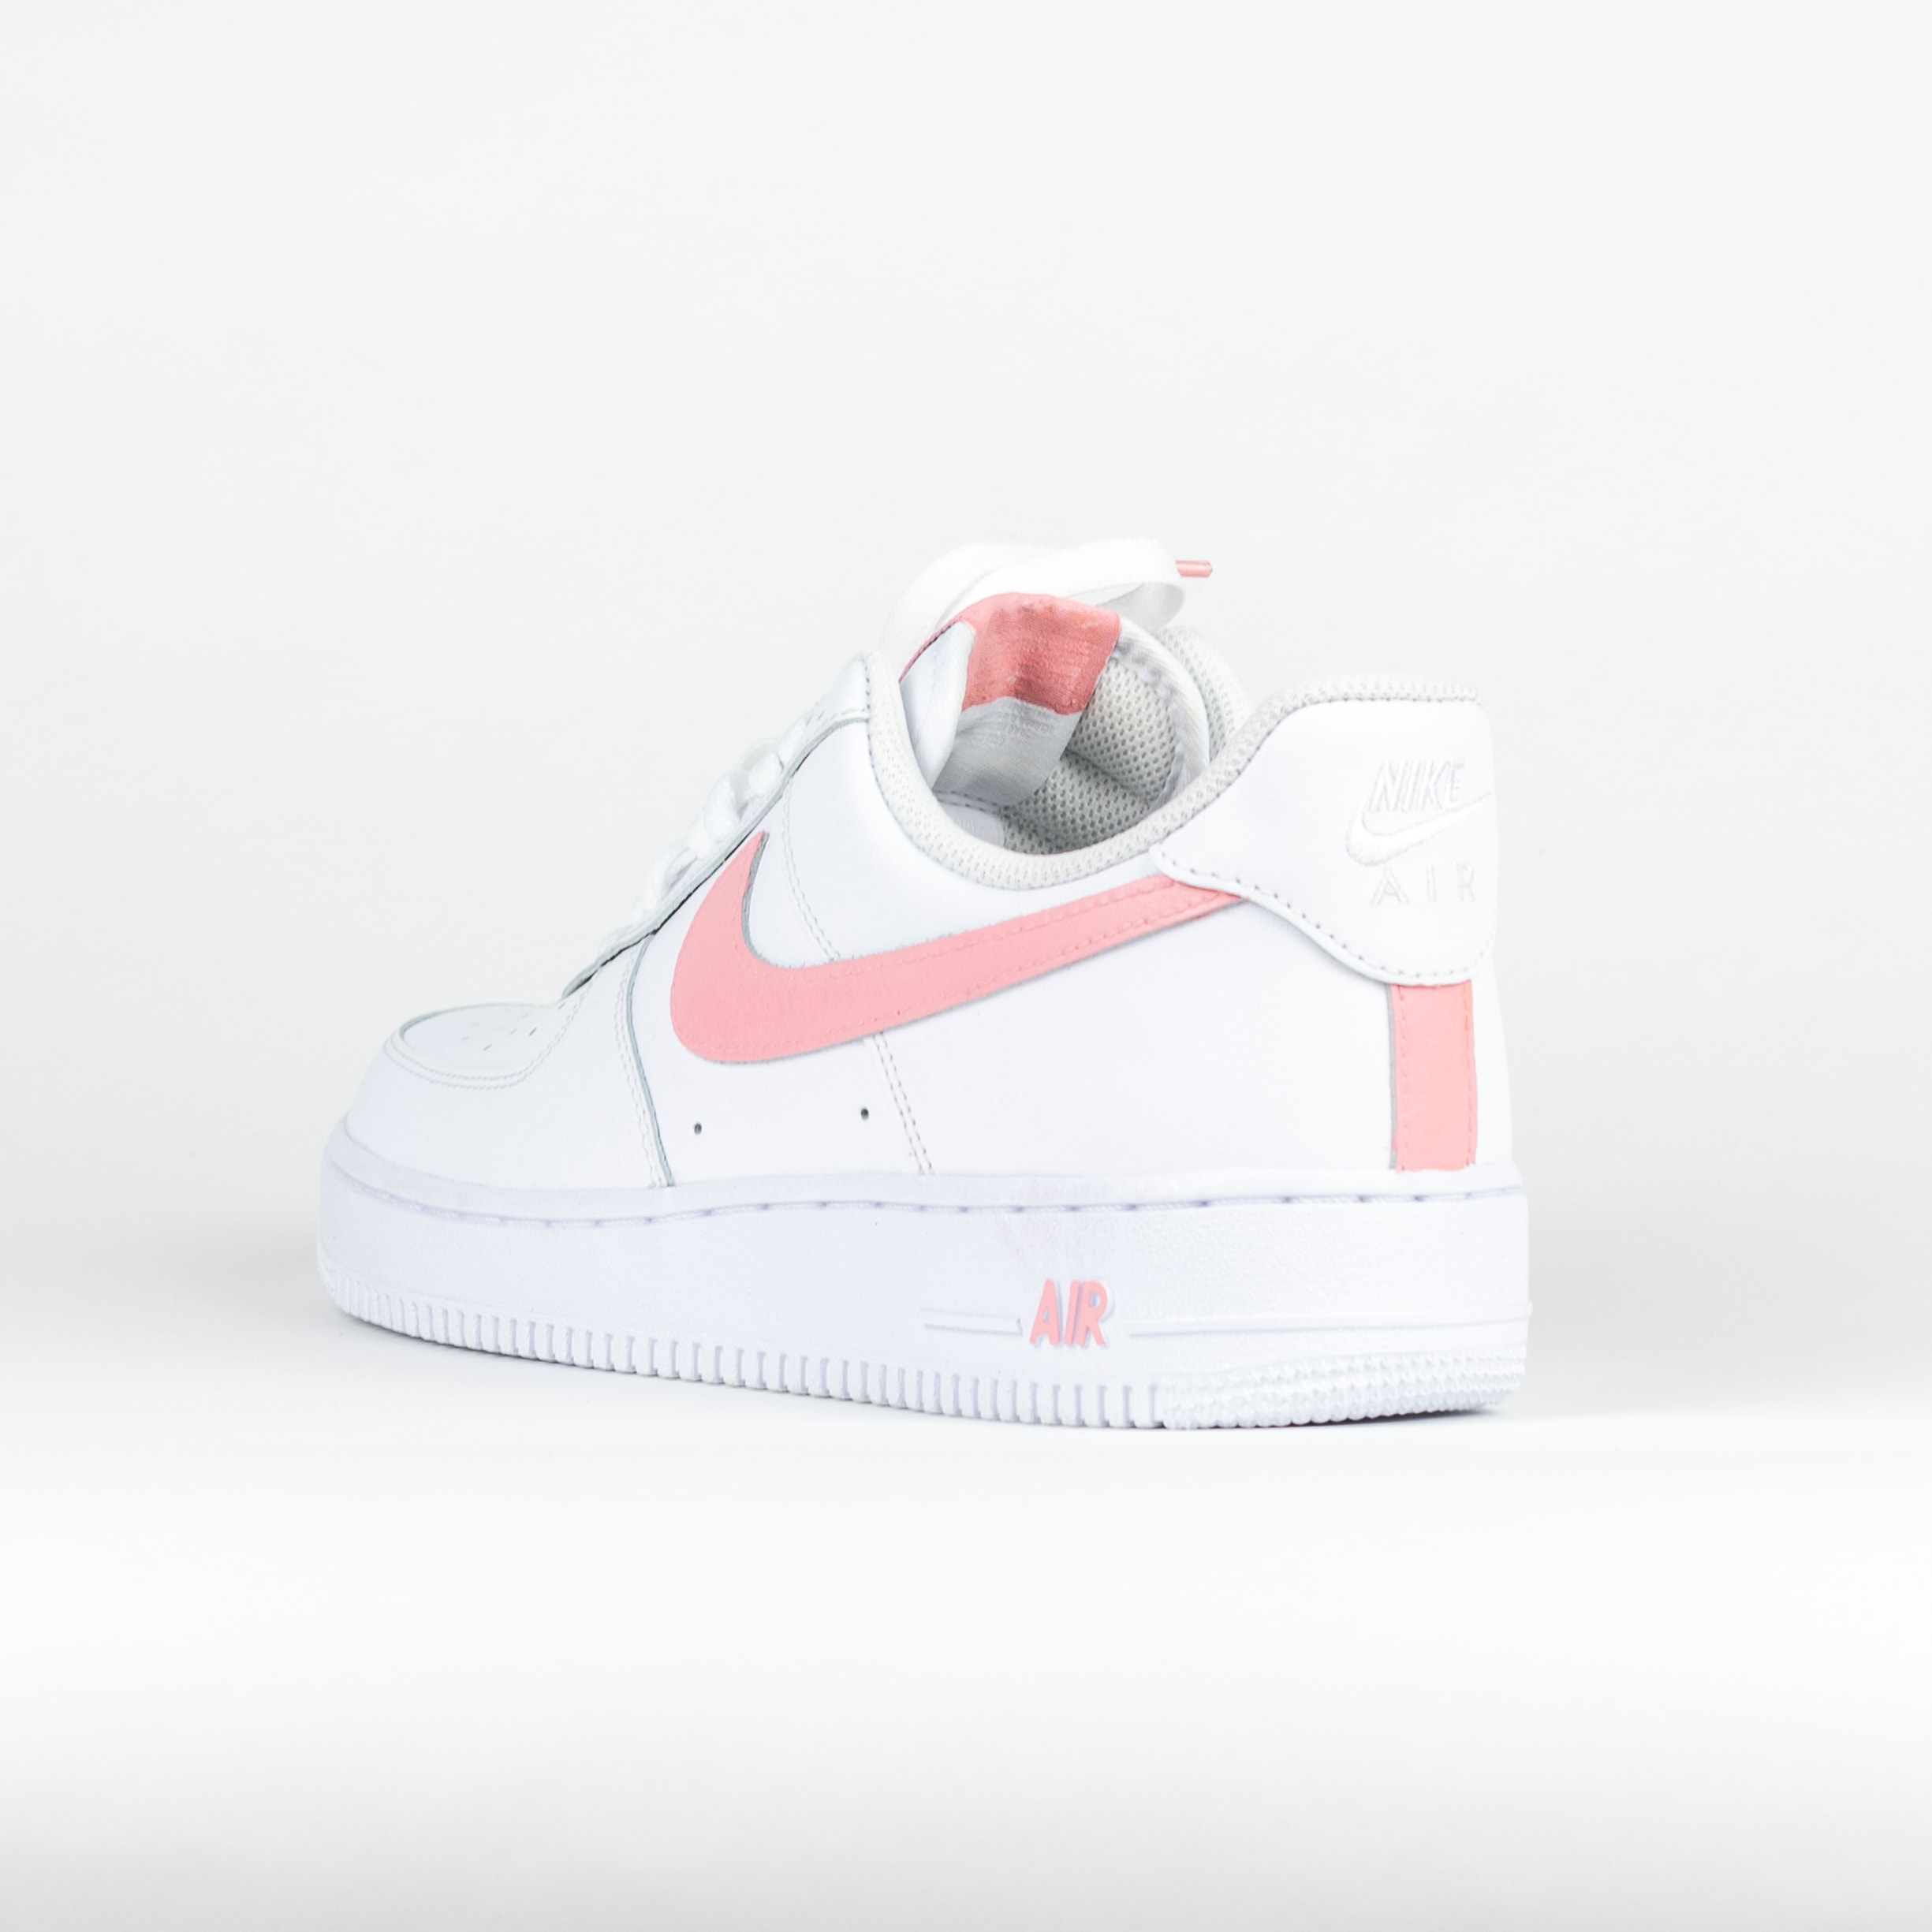 air forces with pink swoosh